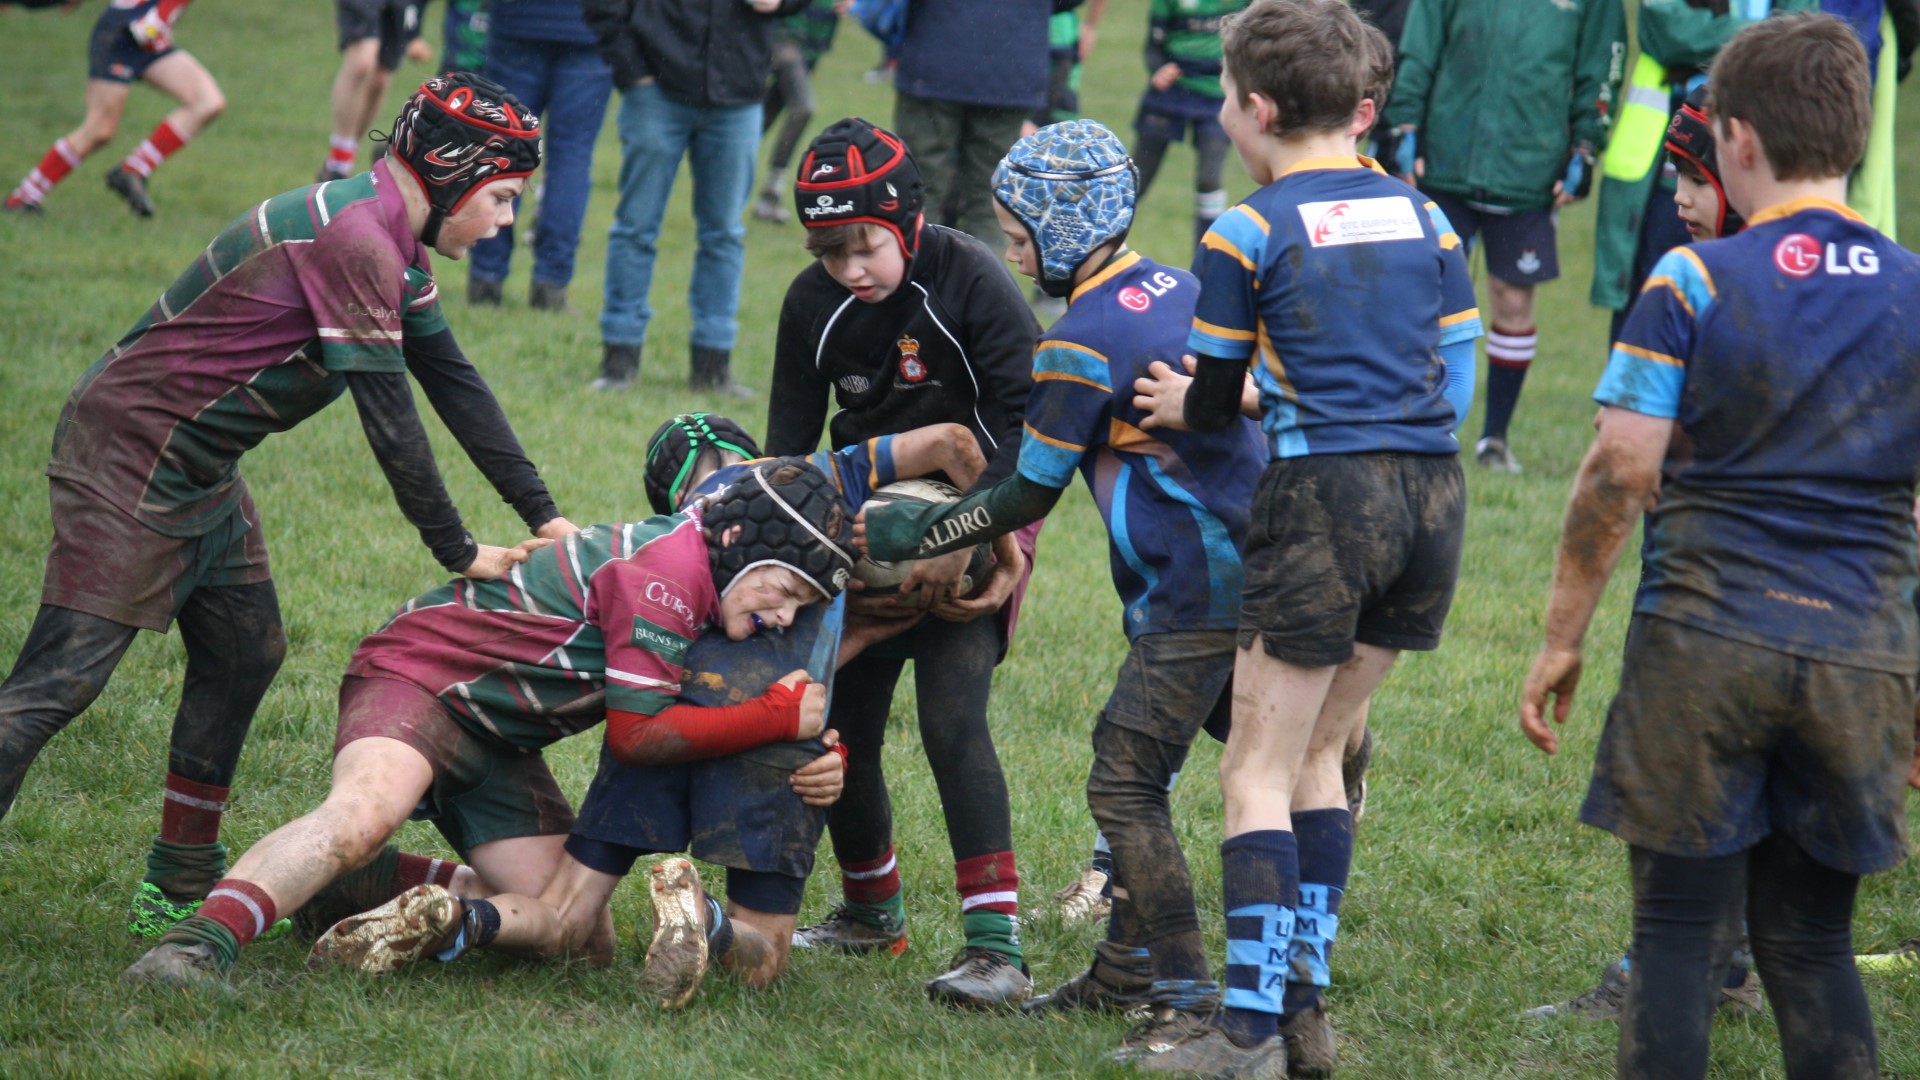 Image of Guildfordians RFC (GRFC) Minis Rugby team located on Stoke Park Guildford